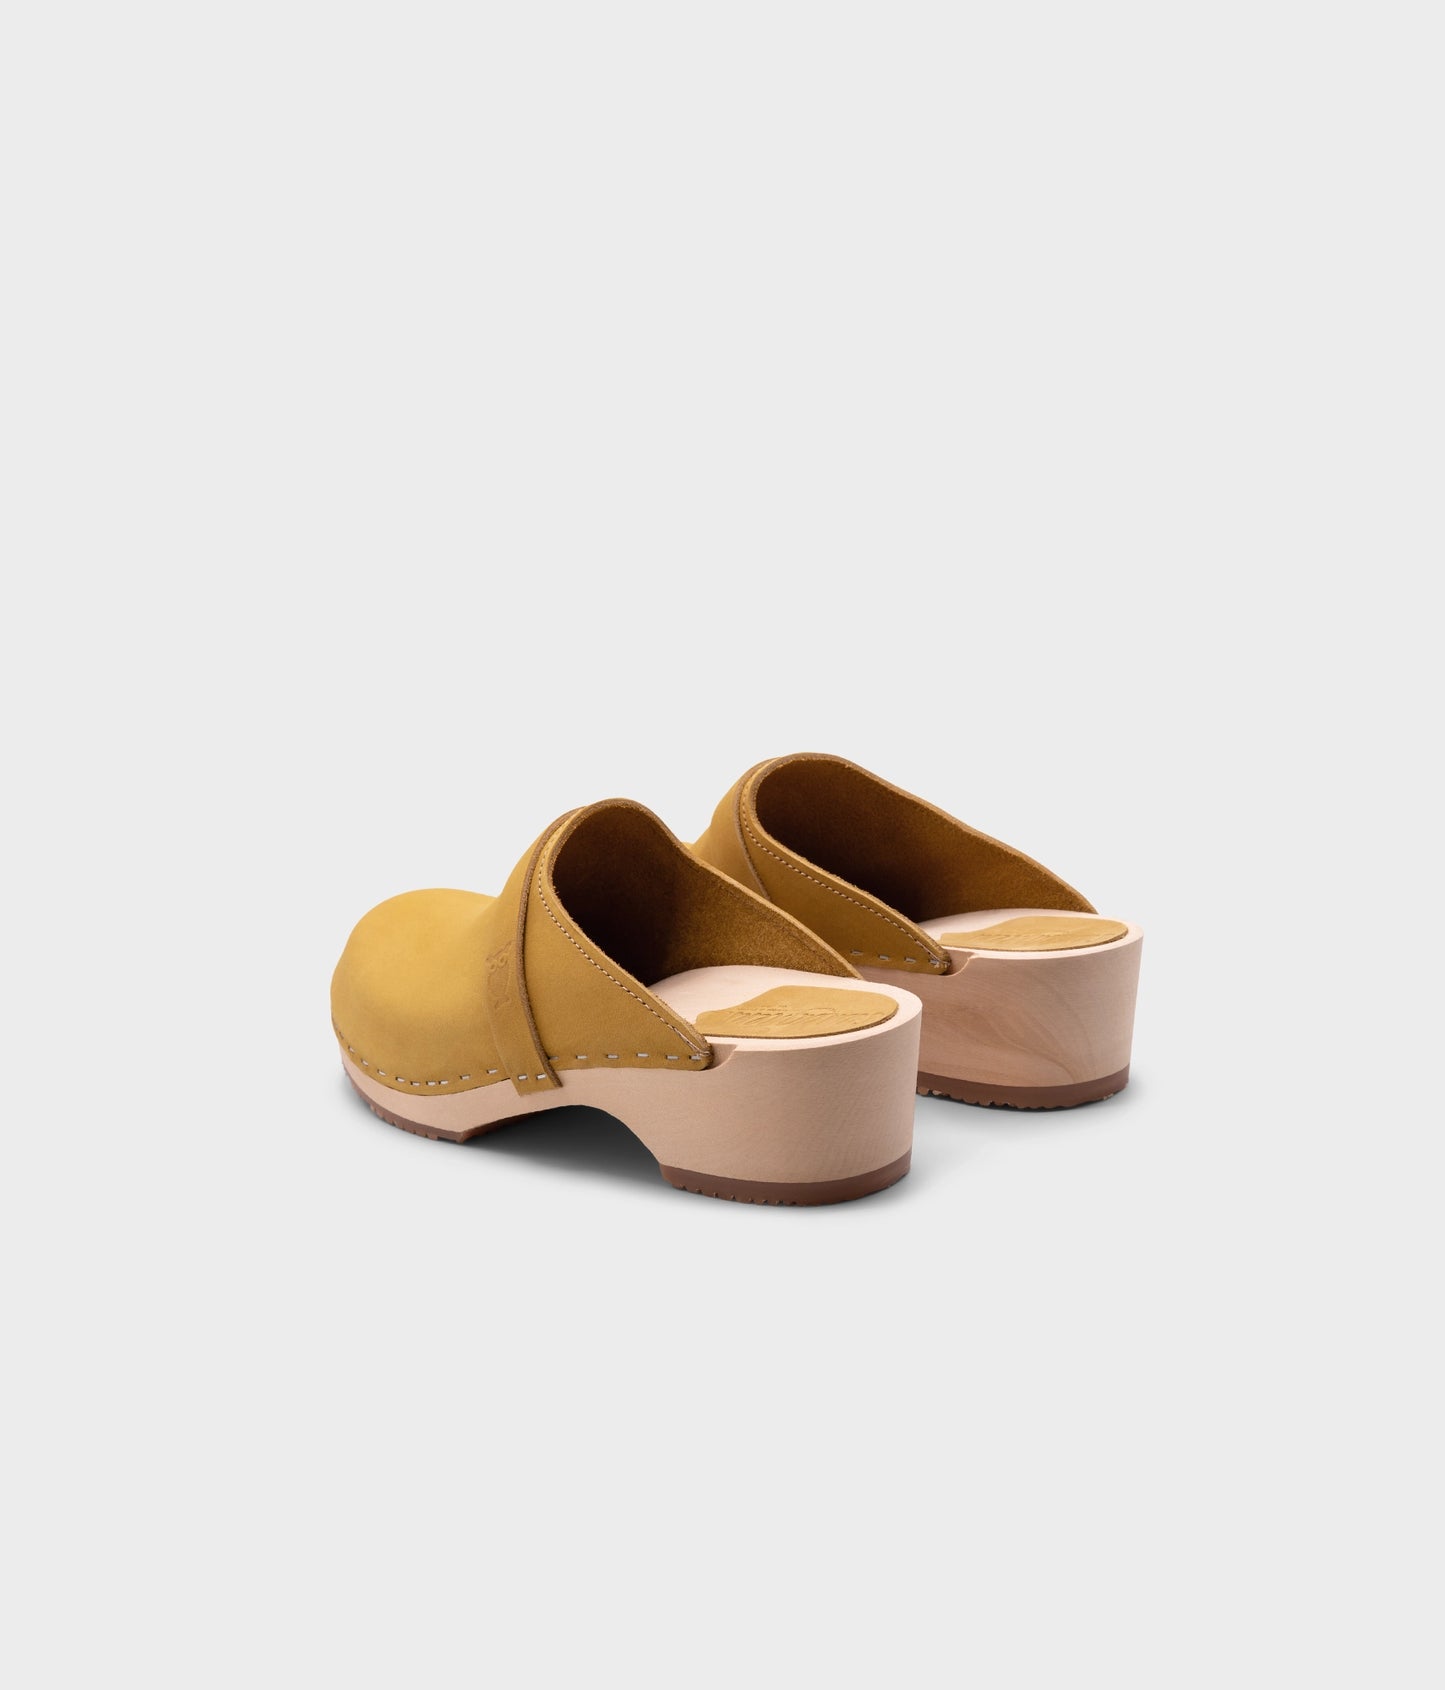 classic low heeled clog mule in yellow nubuck leather stapled on a light wooden base with a leather strap